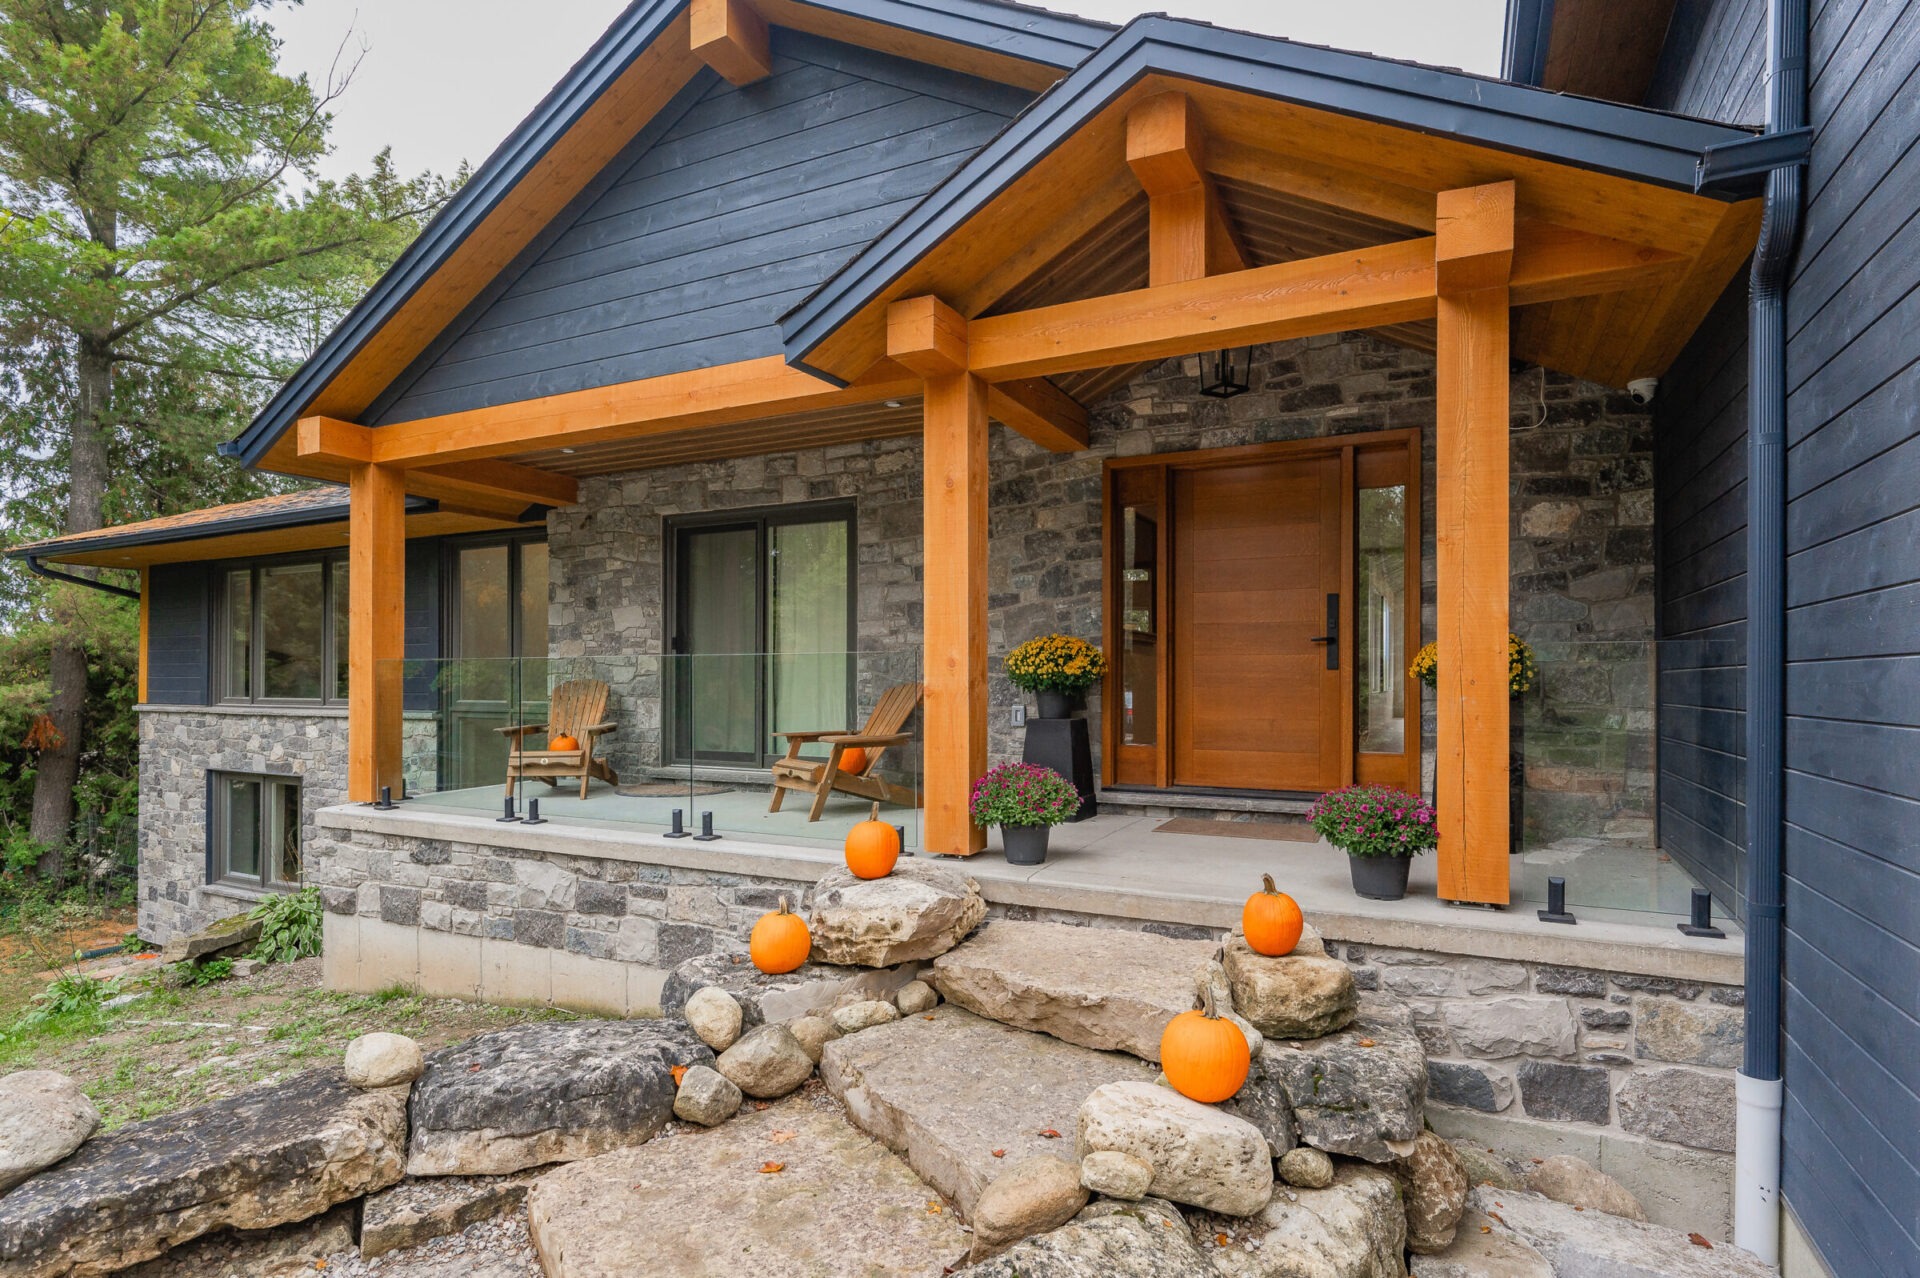 A modern house with a blue shingle roof, stone walls, wooden porch supports, a wood door, and seasonal decorations like pumpkins and flowers.